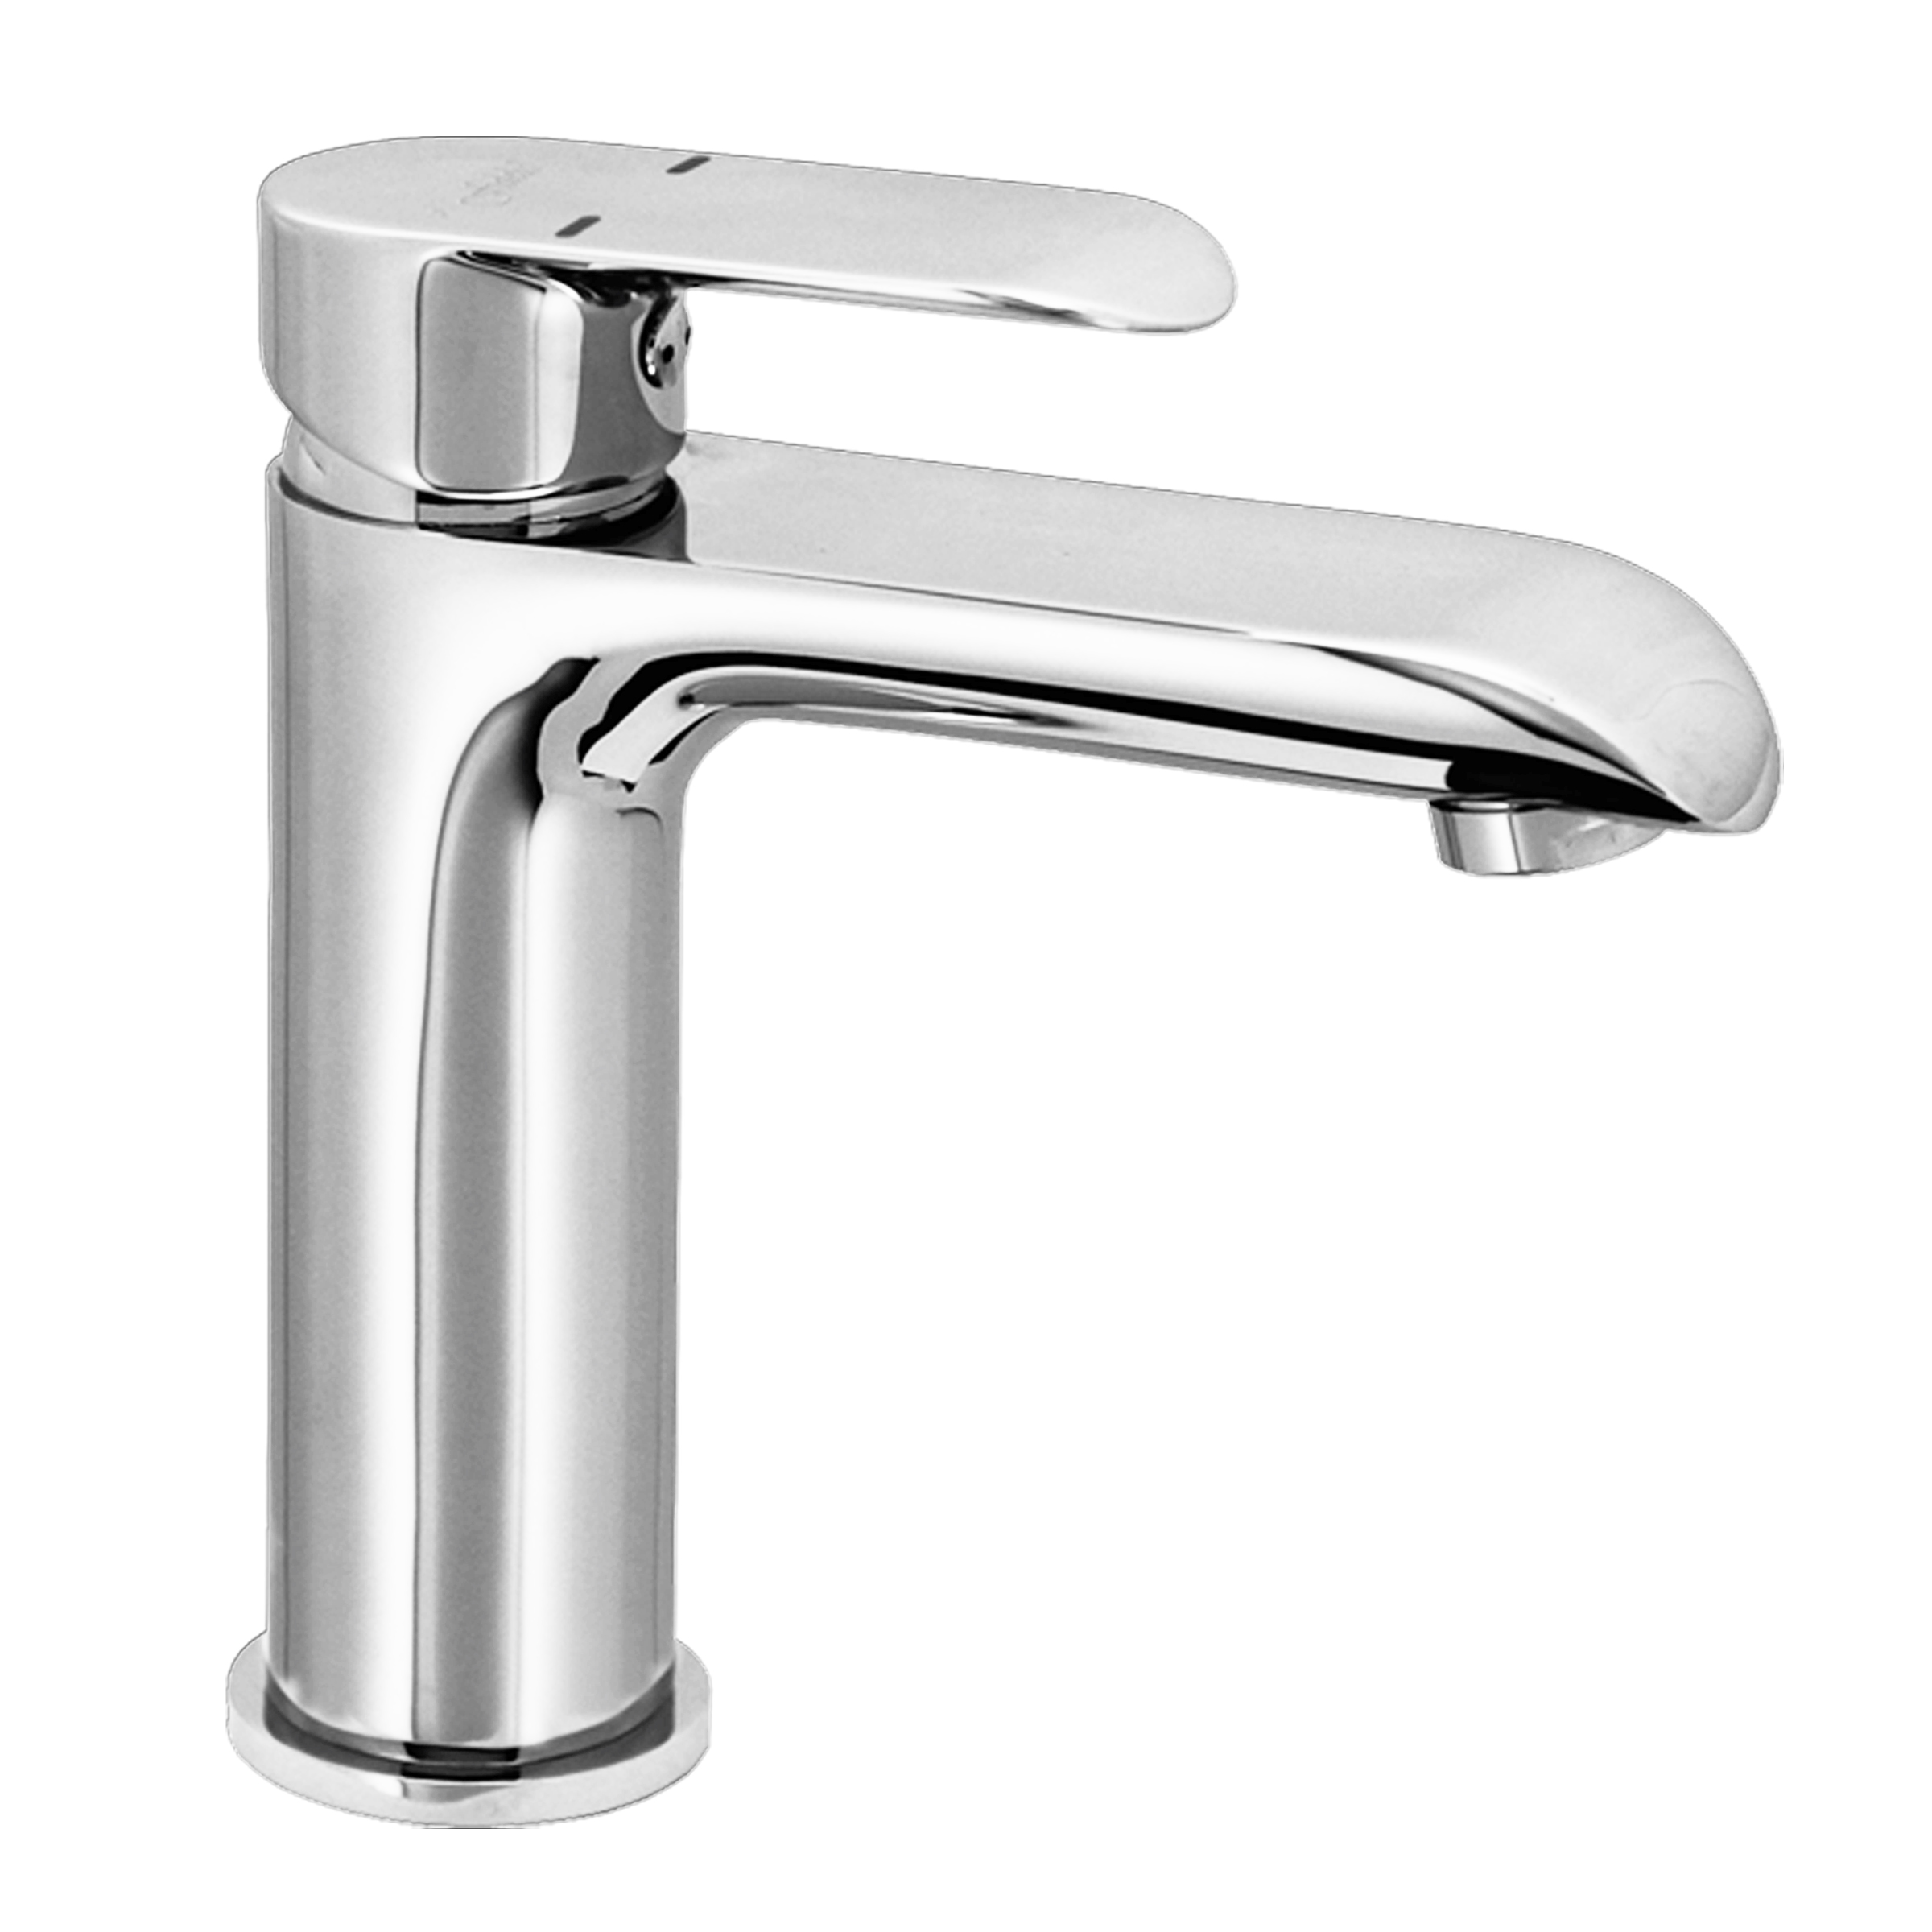 FT-7601-Basin-Mixer-Forrest-Series